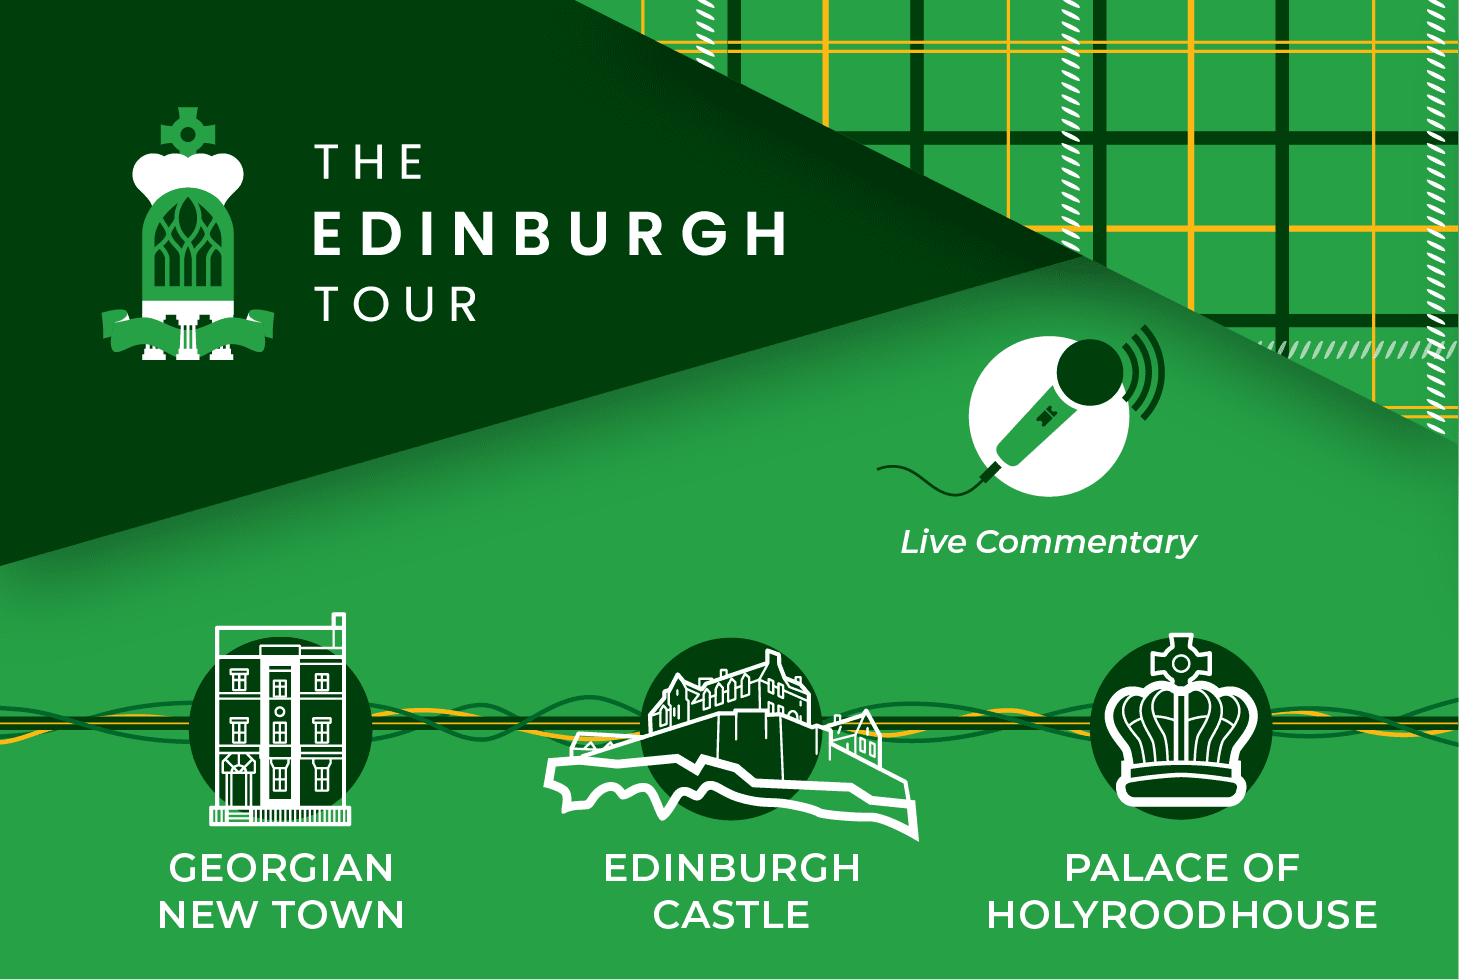 Edinburgh Tour. Live Guided Commentary. The tour includes the Georgian New Town, Edinburgh Castle and Palace of Holyroodhouse.